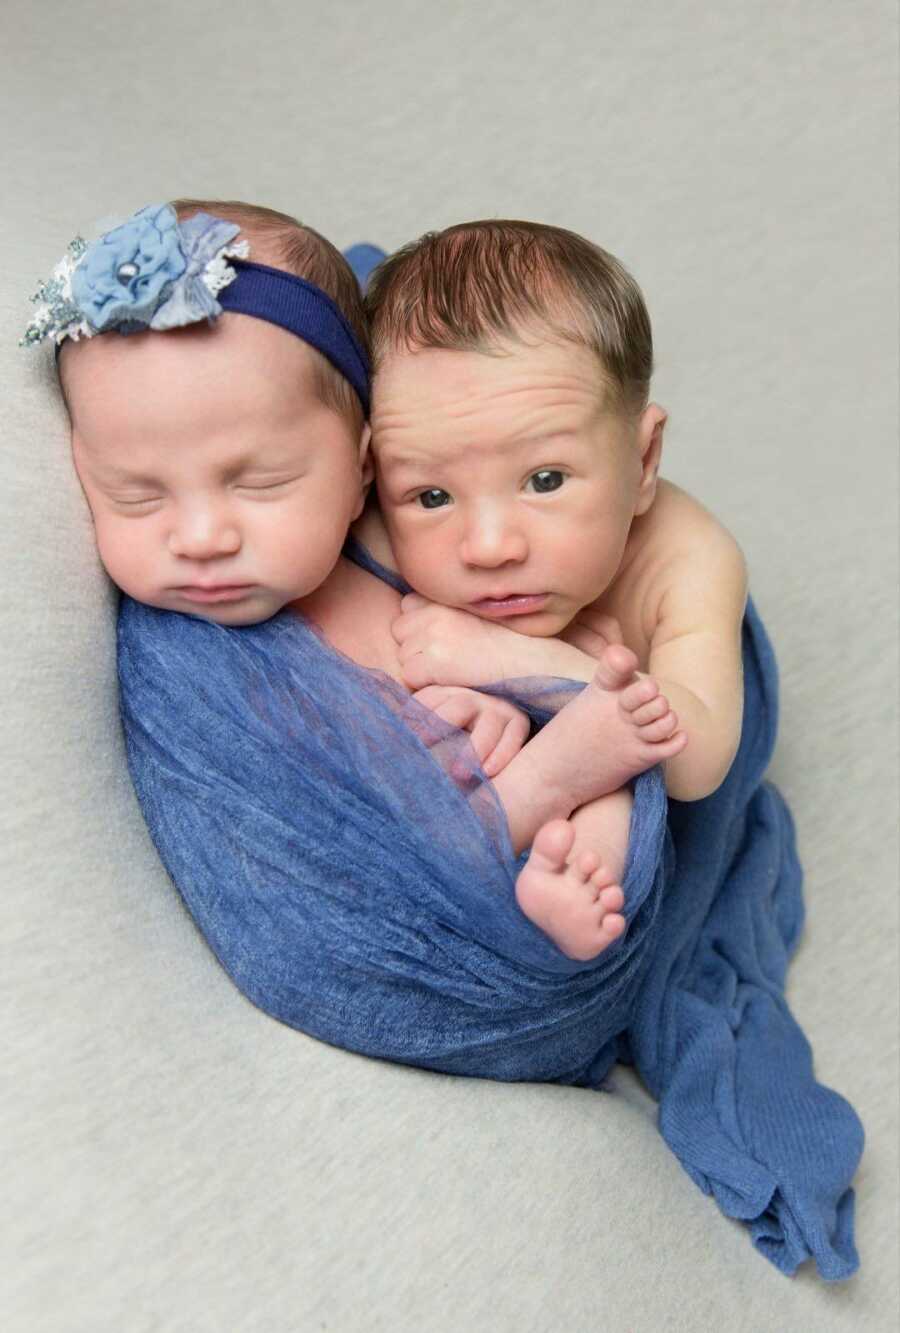 Newborn twin babies curled up next to each other in a light blue blanket